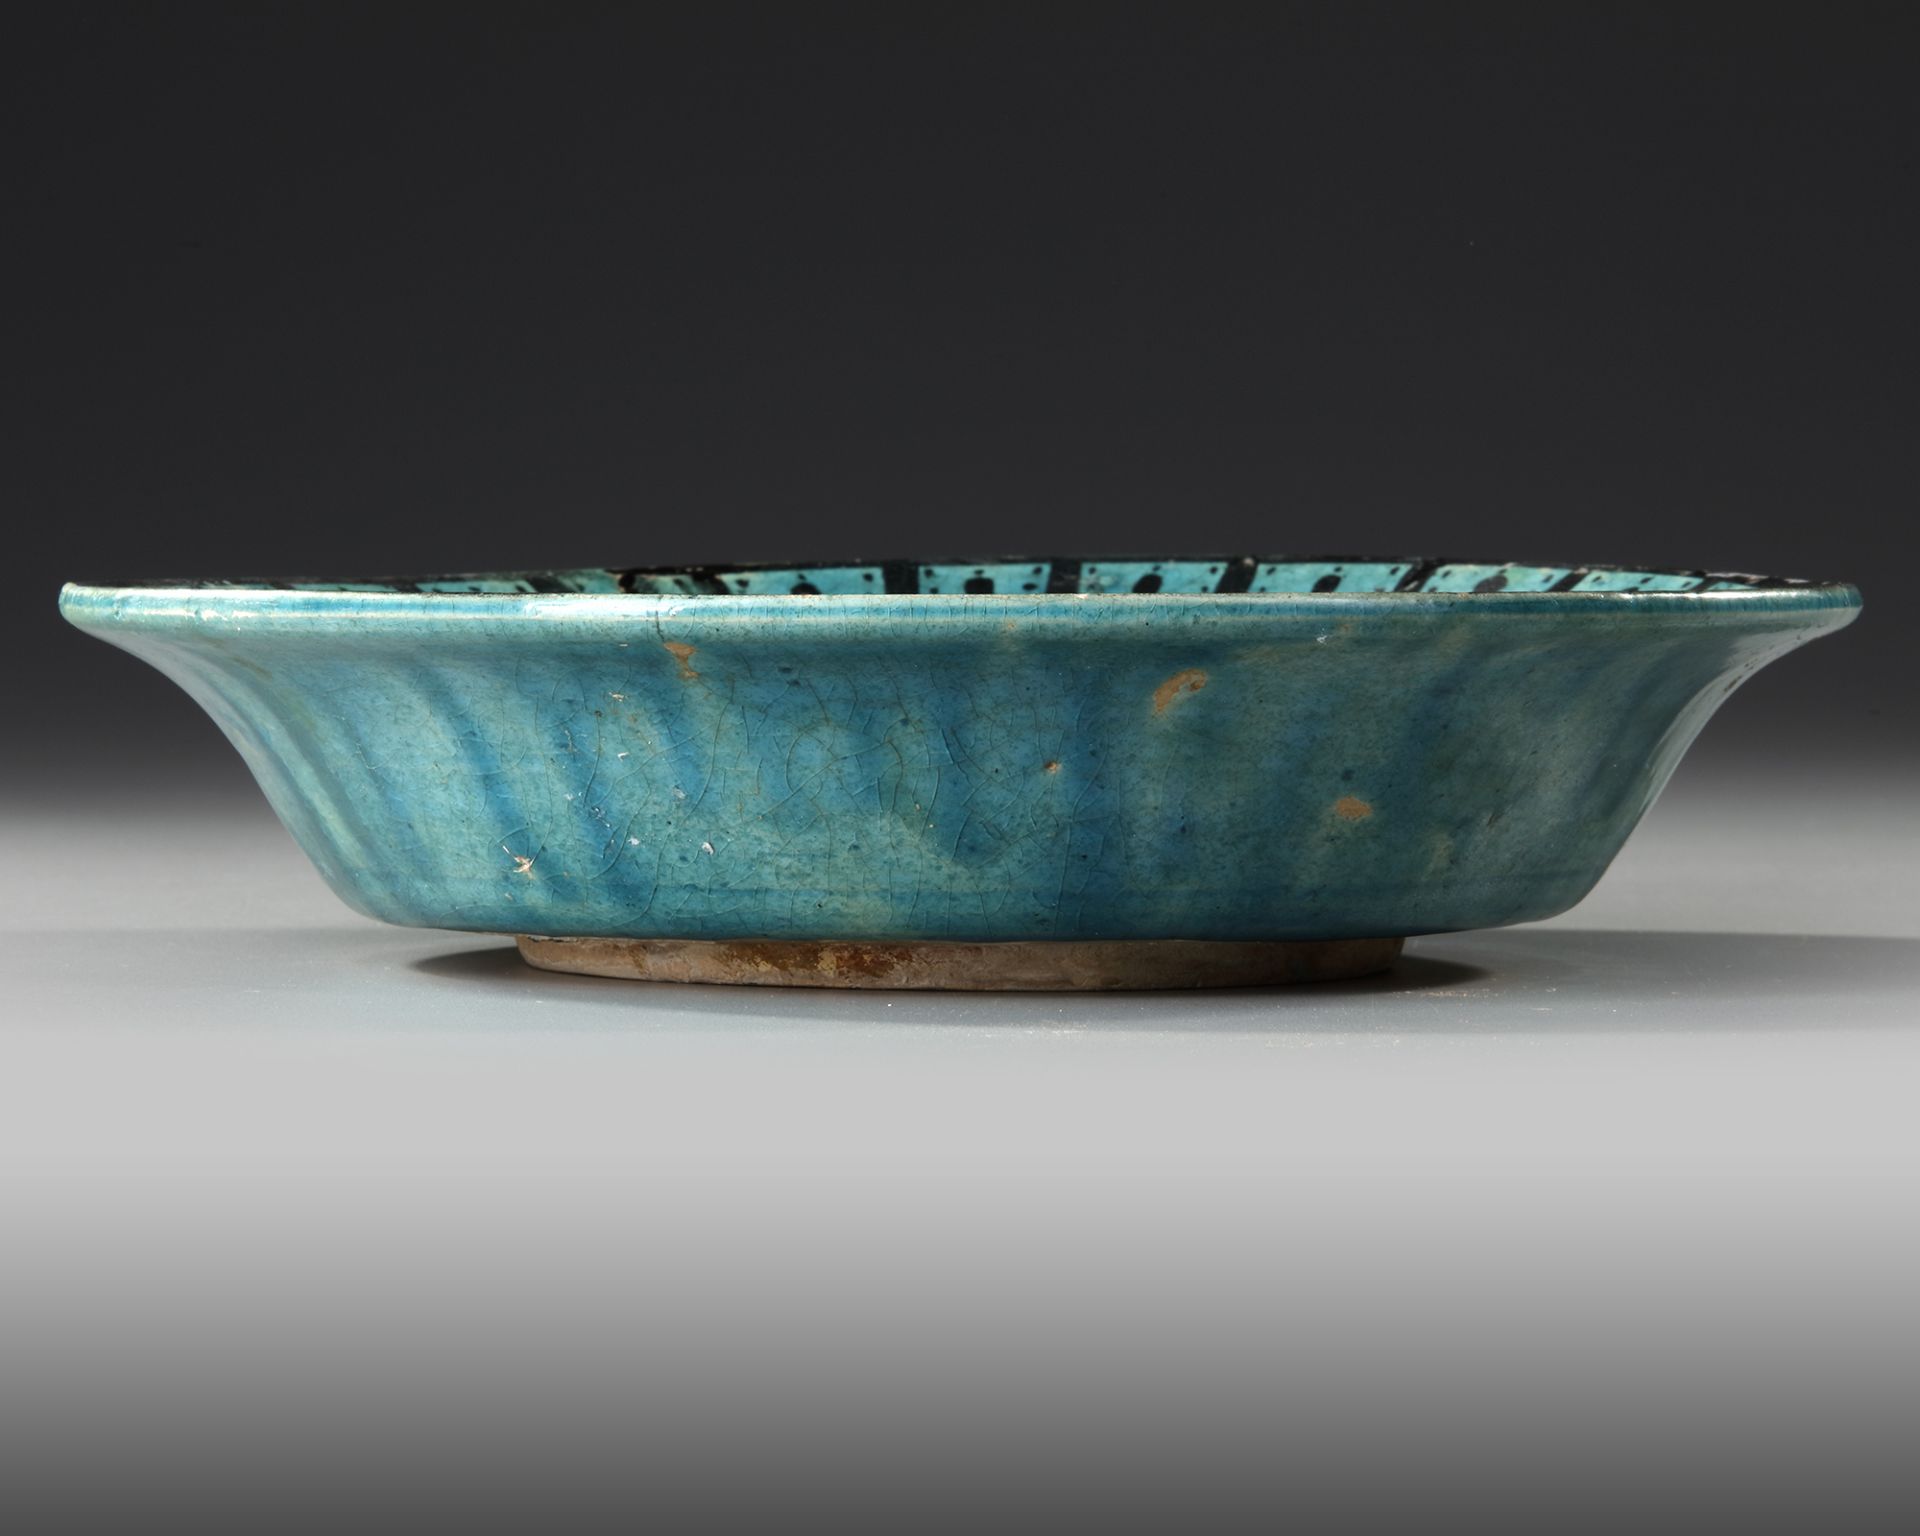 A RAQQA TURQUOISE-GLAZED POTTERY DISH, SYRIA, EARLY 13TH CENTURY - Image 5 of 8